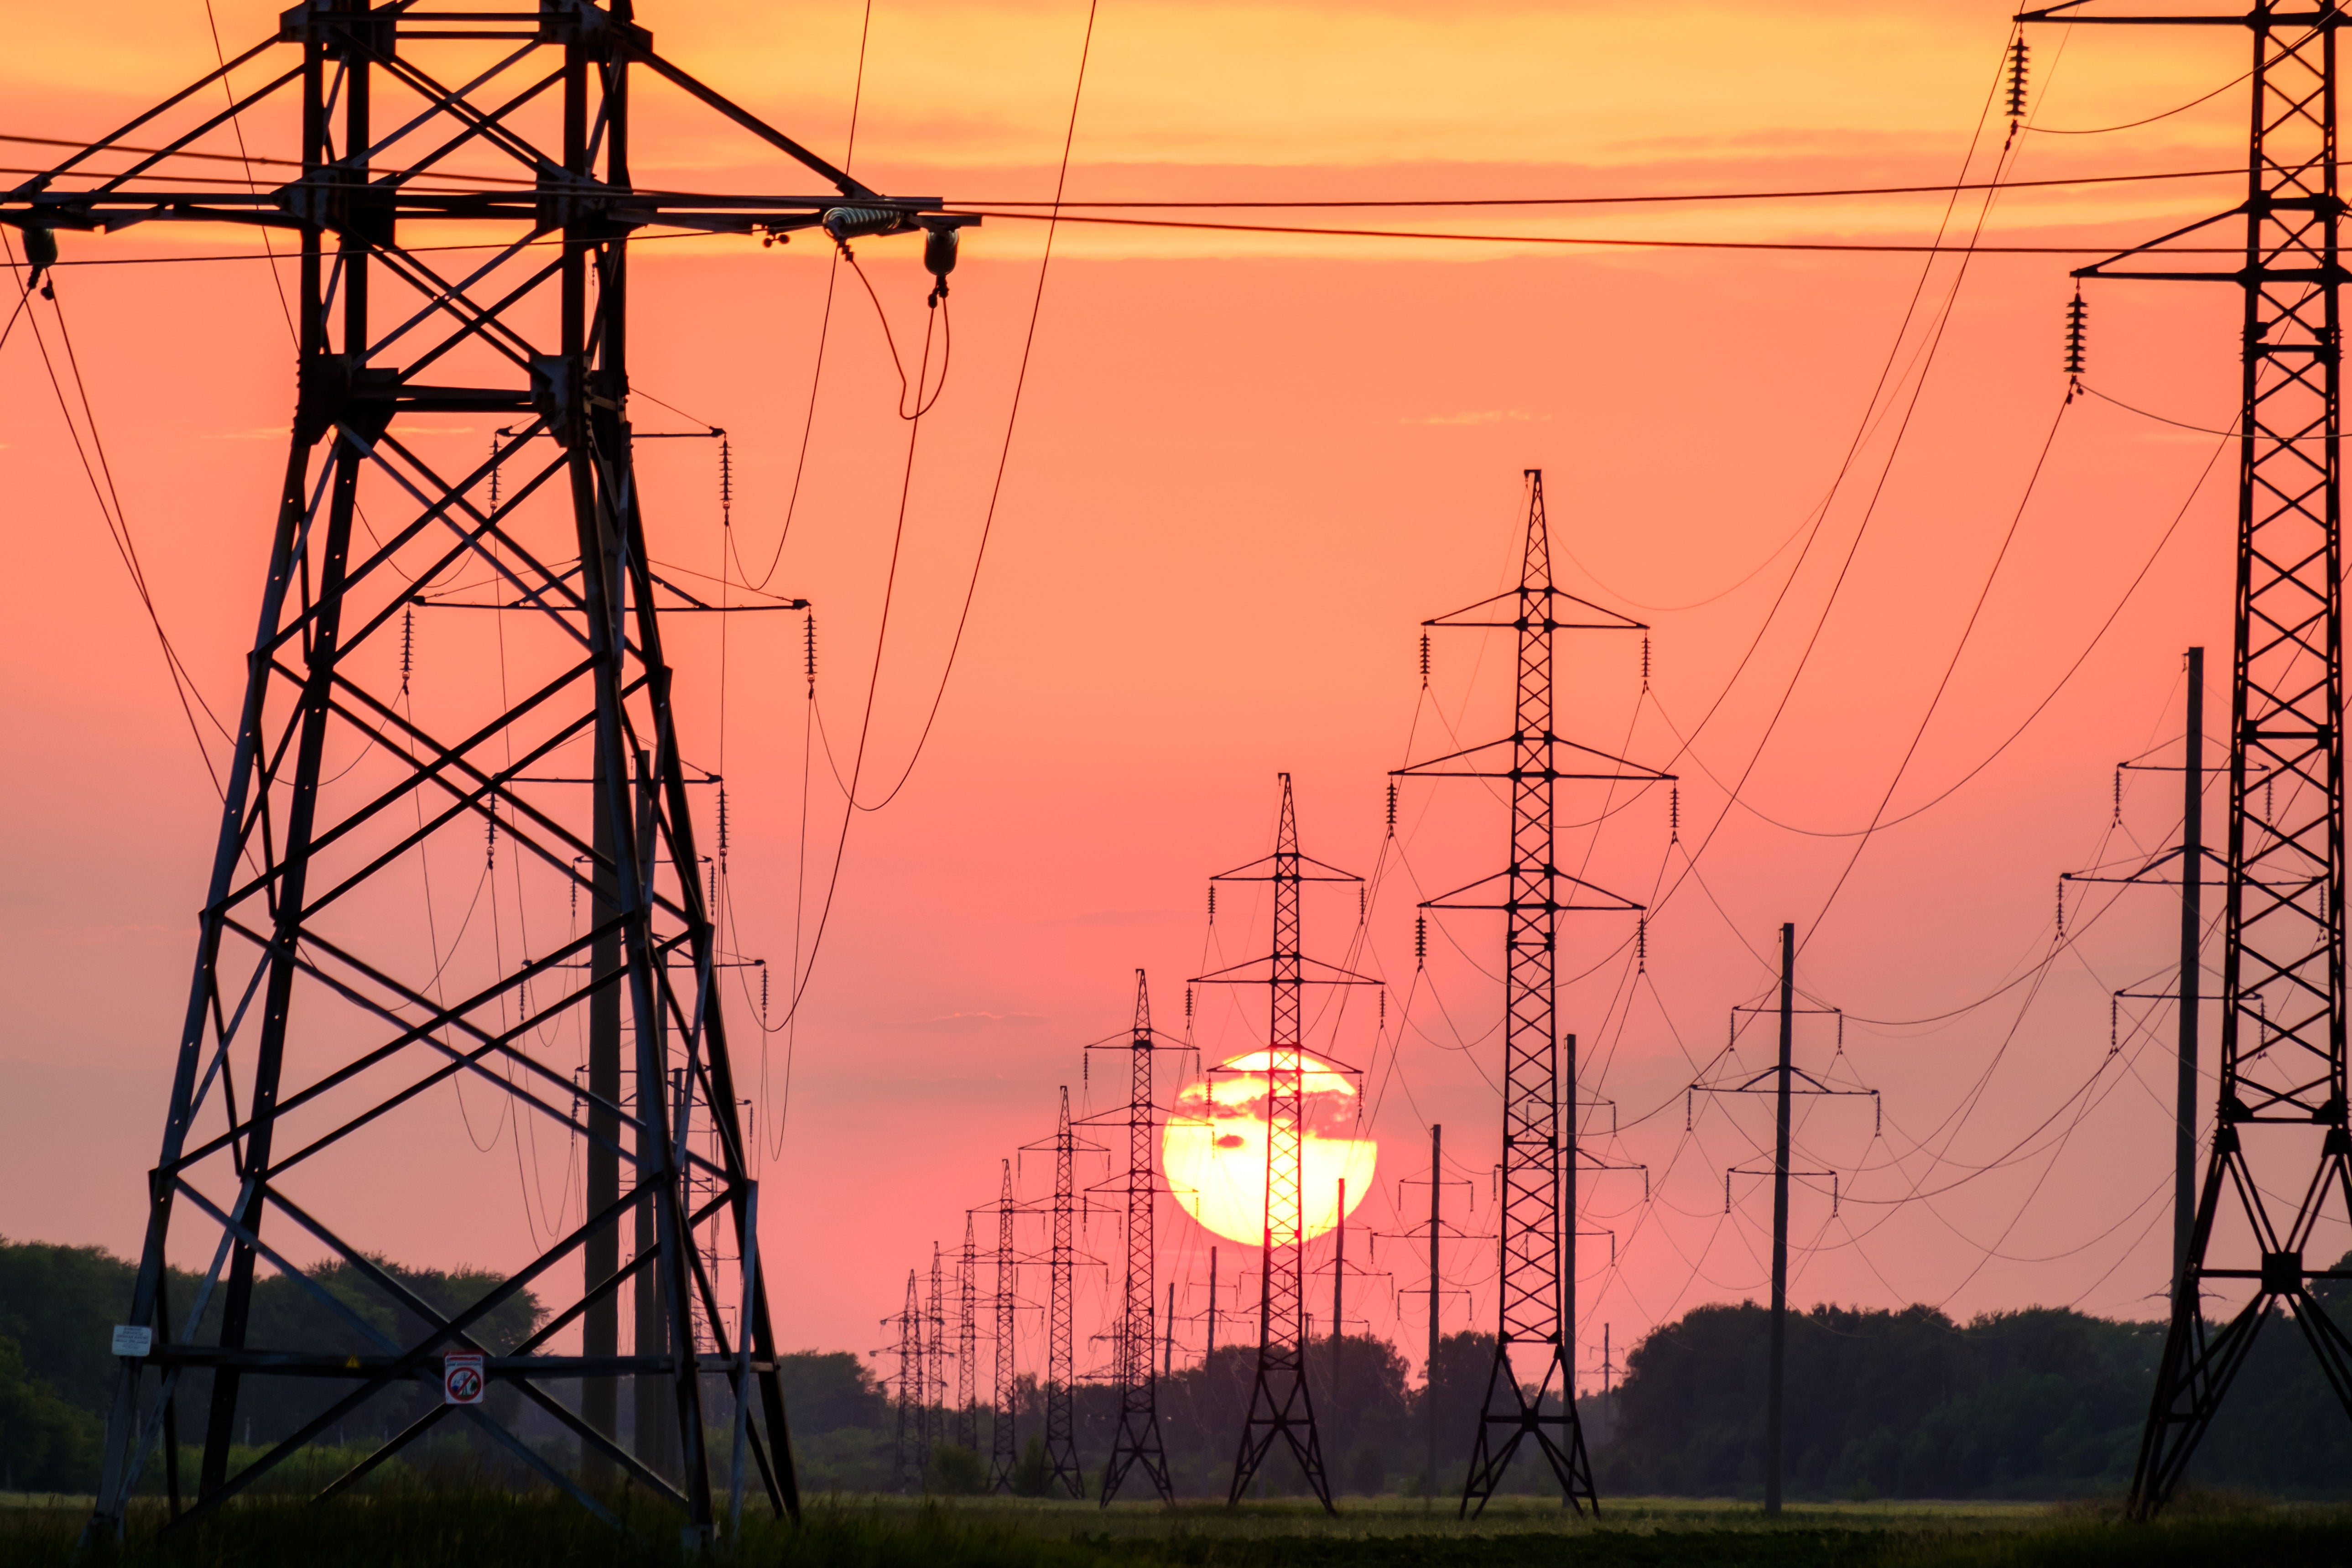 Underground Power Lines Vs. Overhead Power Lines: Where is the Future?